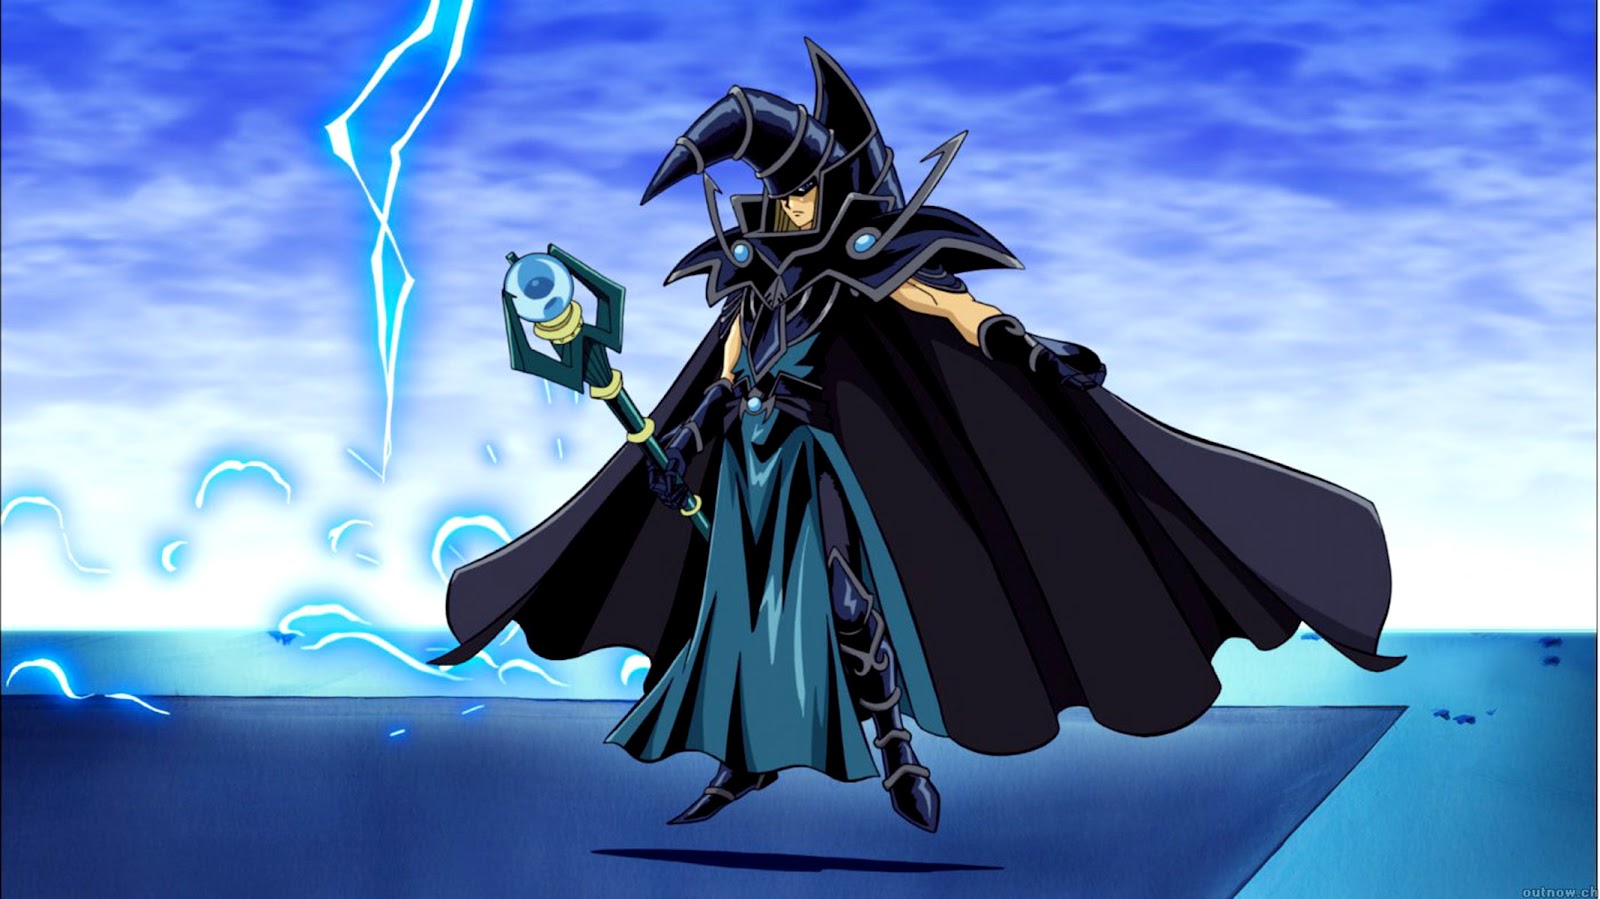 Central Wallpaper: Yu Gi Oh HD Anime Wallpapers